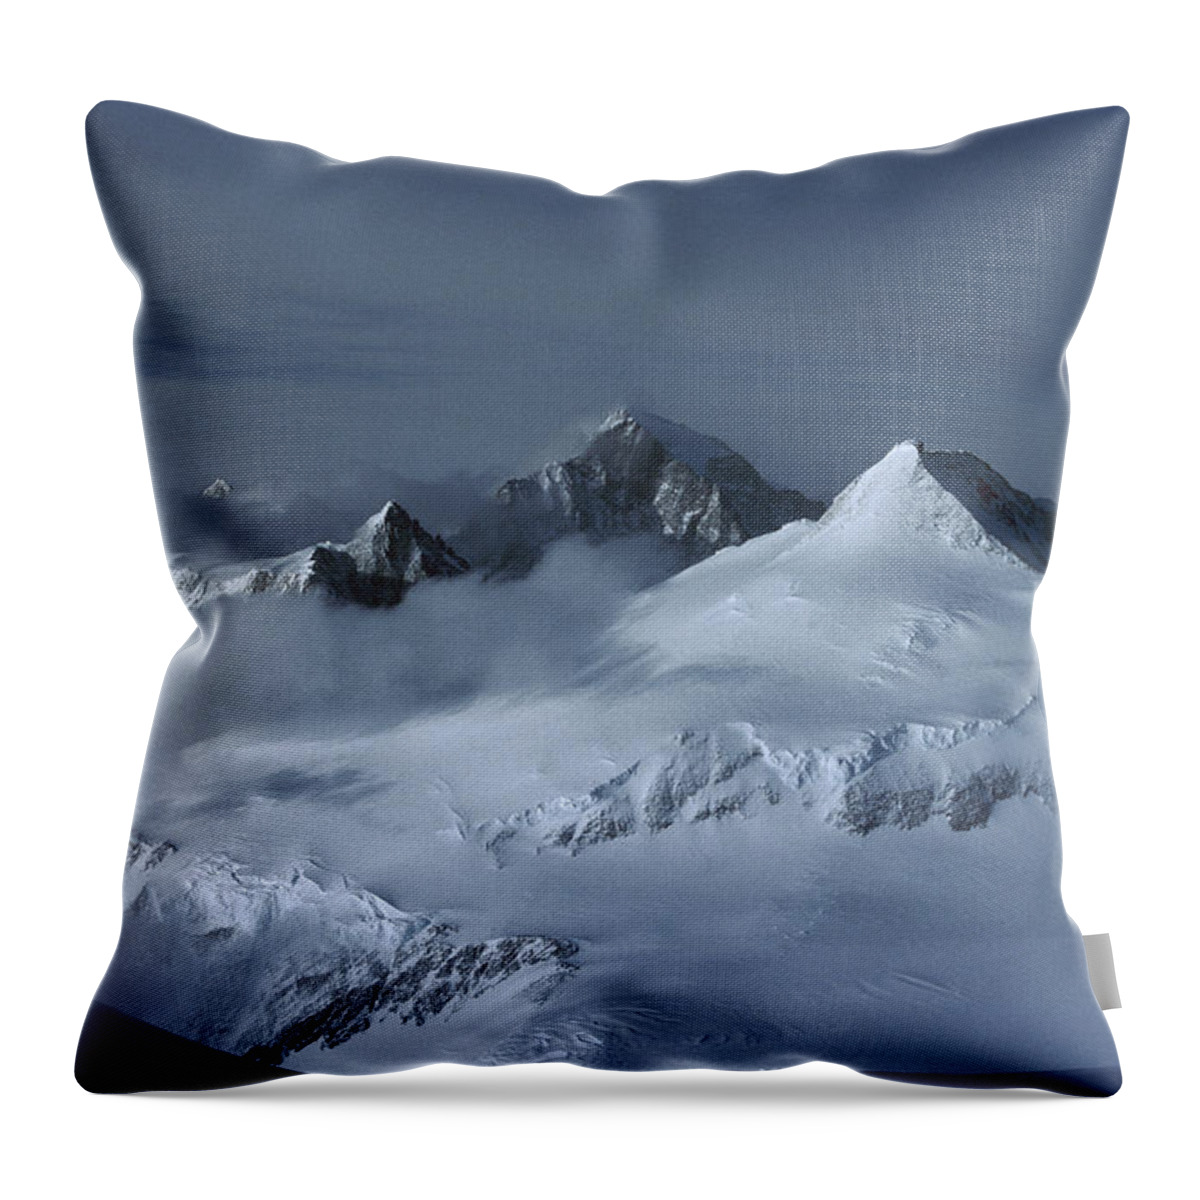 Feb0514 Throw Pillow featuring the photograph Midnigh Tview From Vinson Massif by Colin Monteath